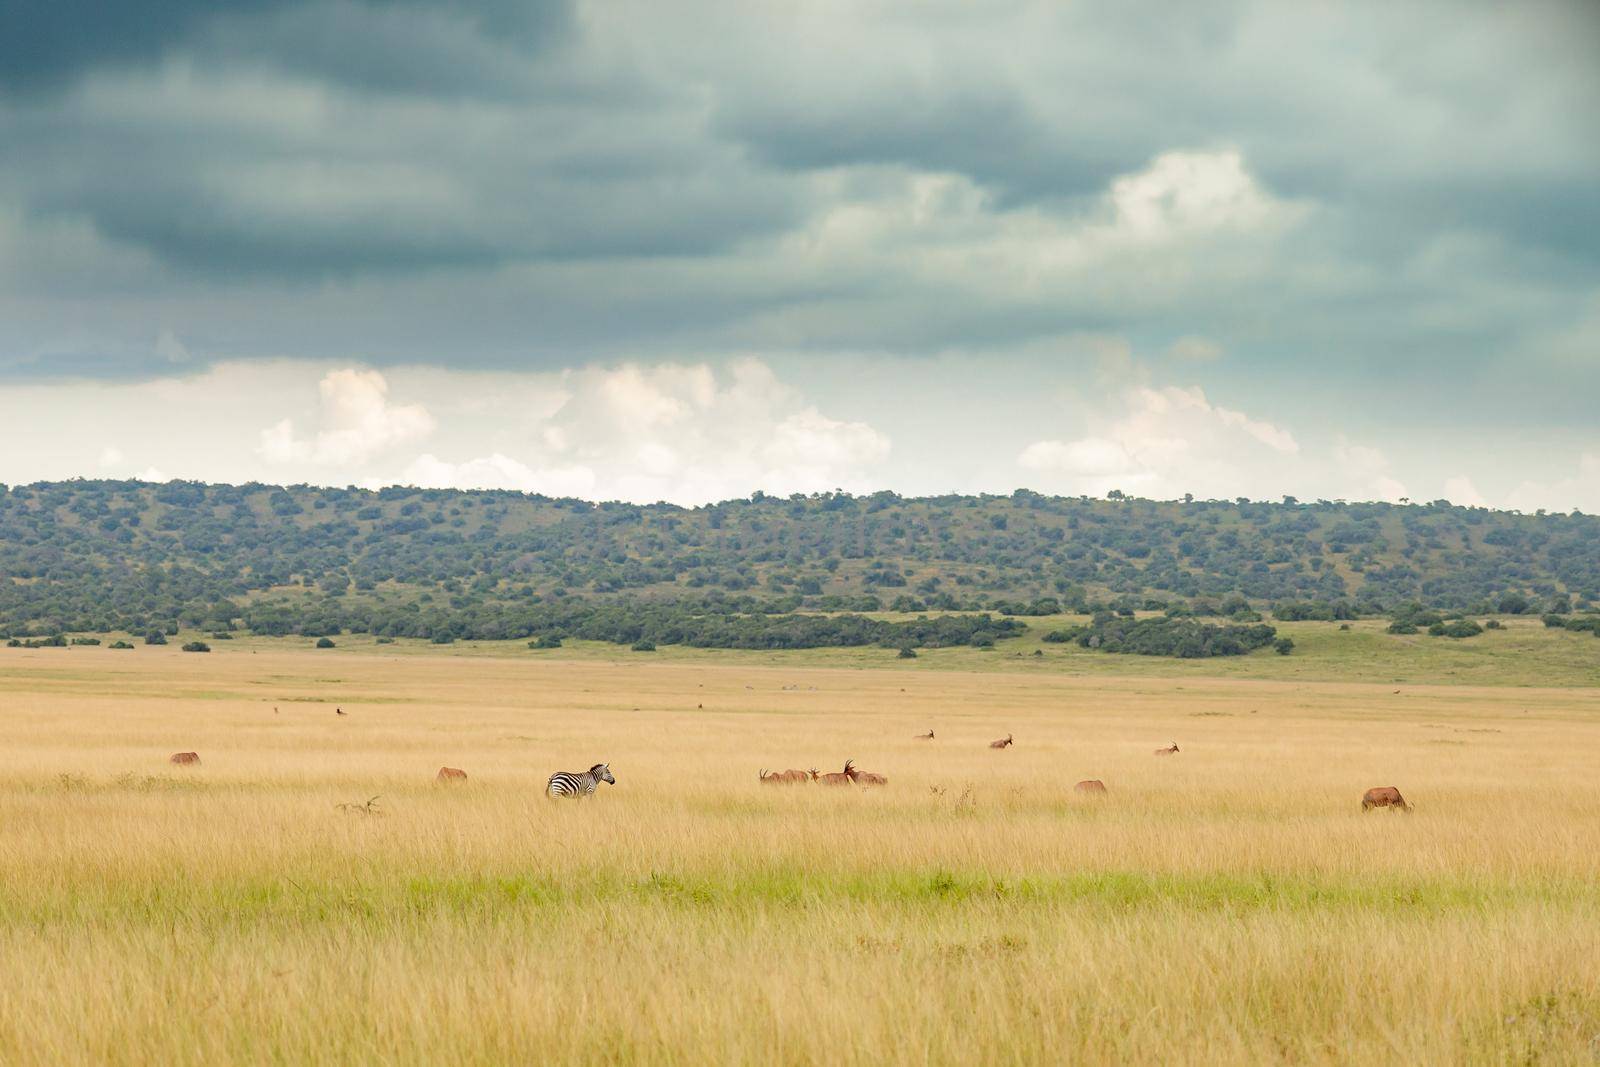 Herd of impalas and zebras graze in a meadow in the savannah